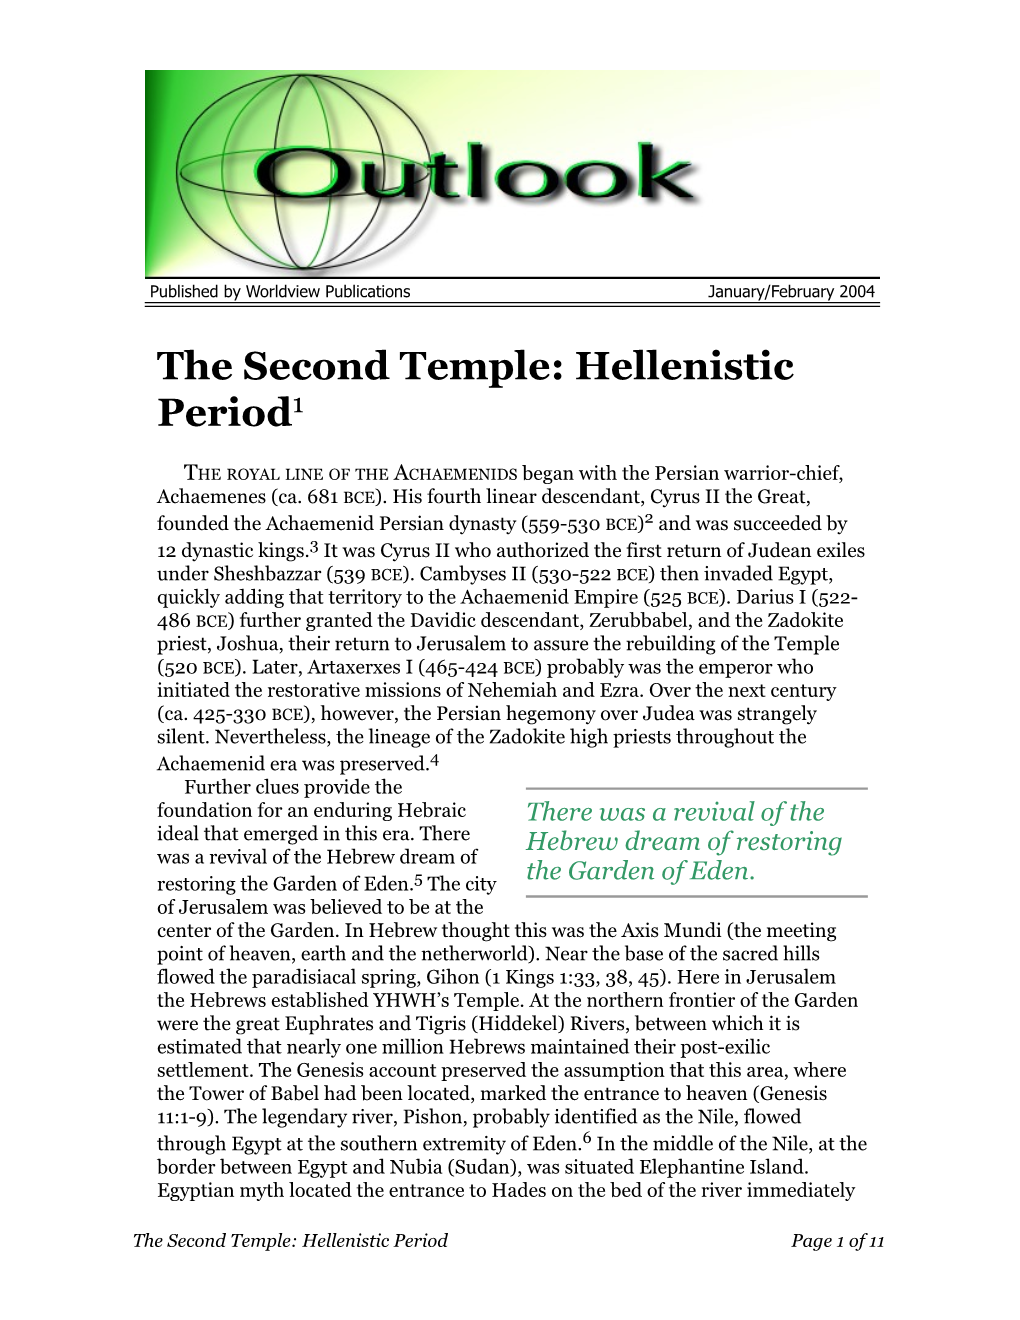 The Second Temple: Hellenistic Period1